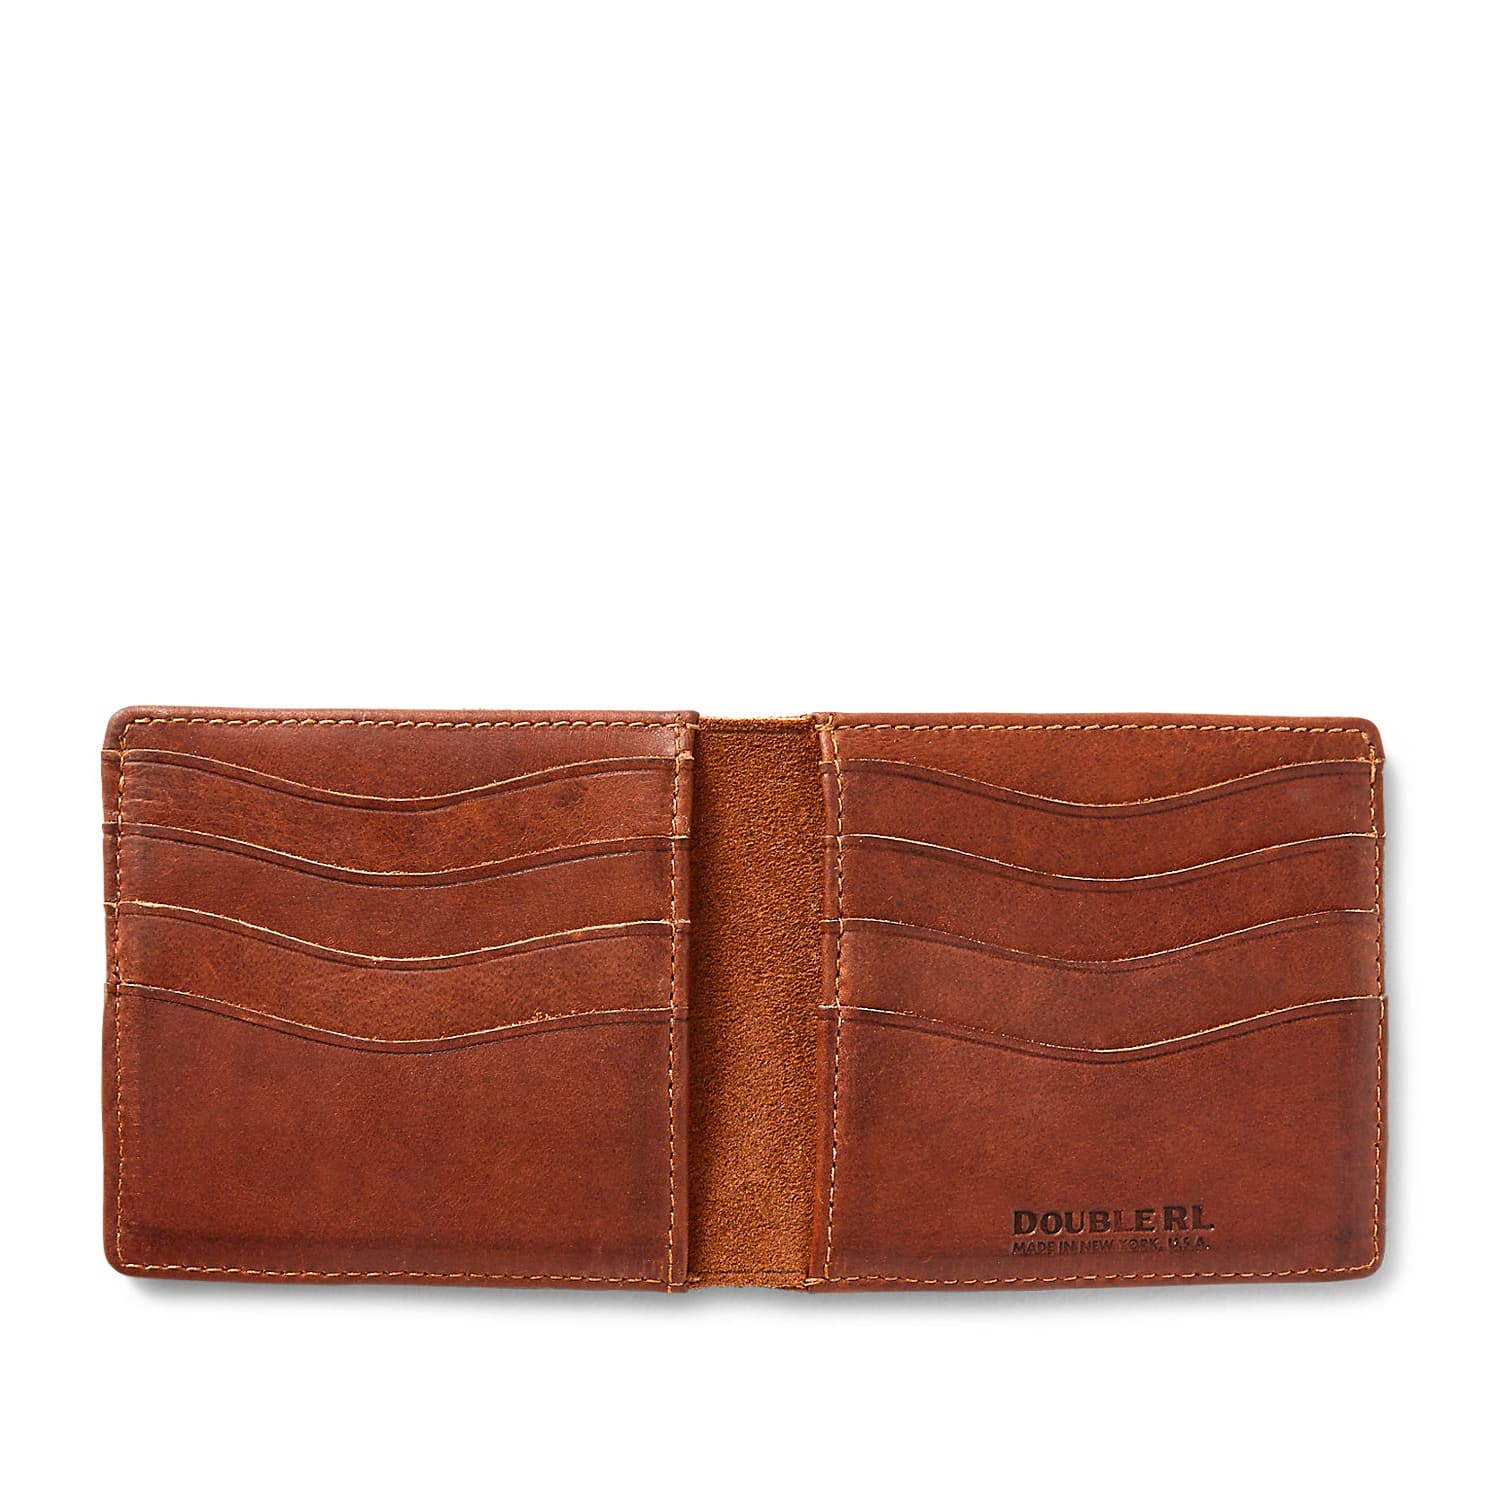 Mad Dog Lucchese Bifold Wallet